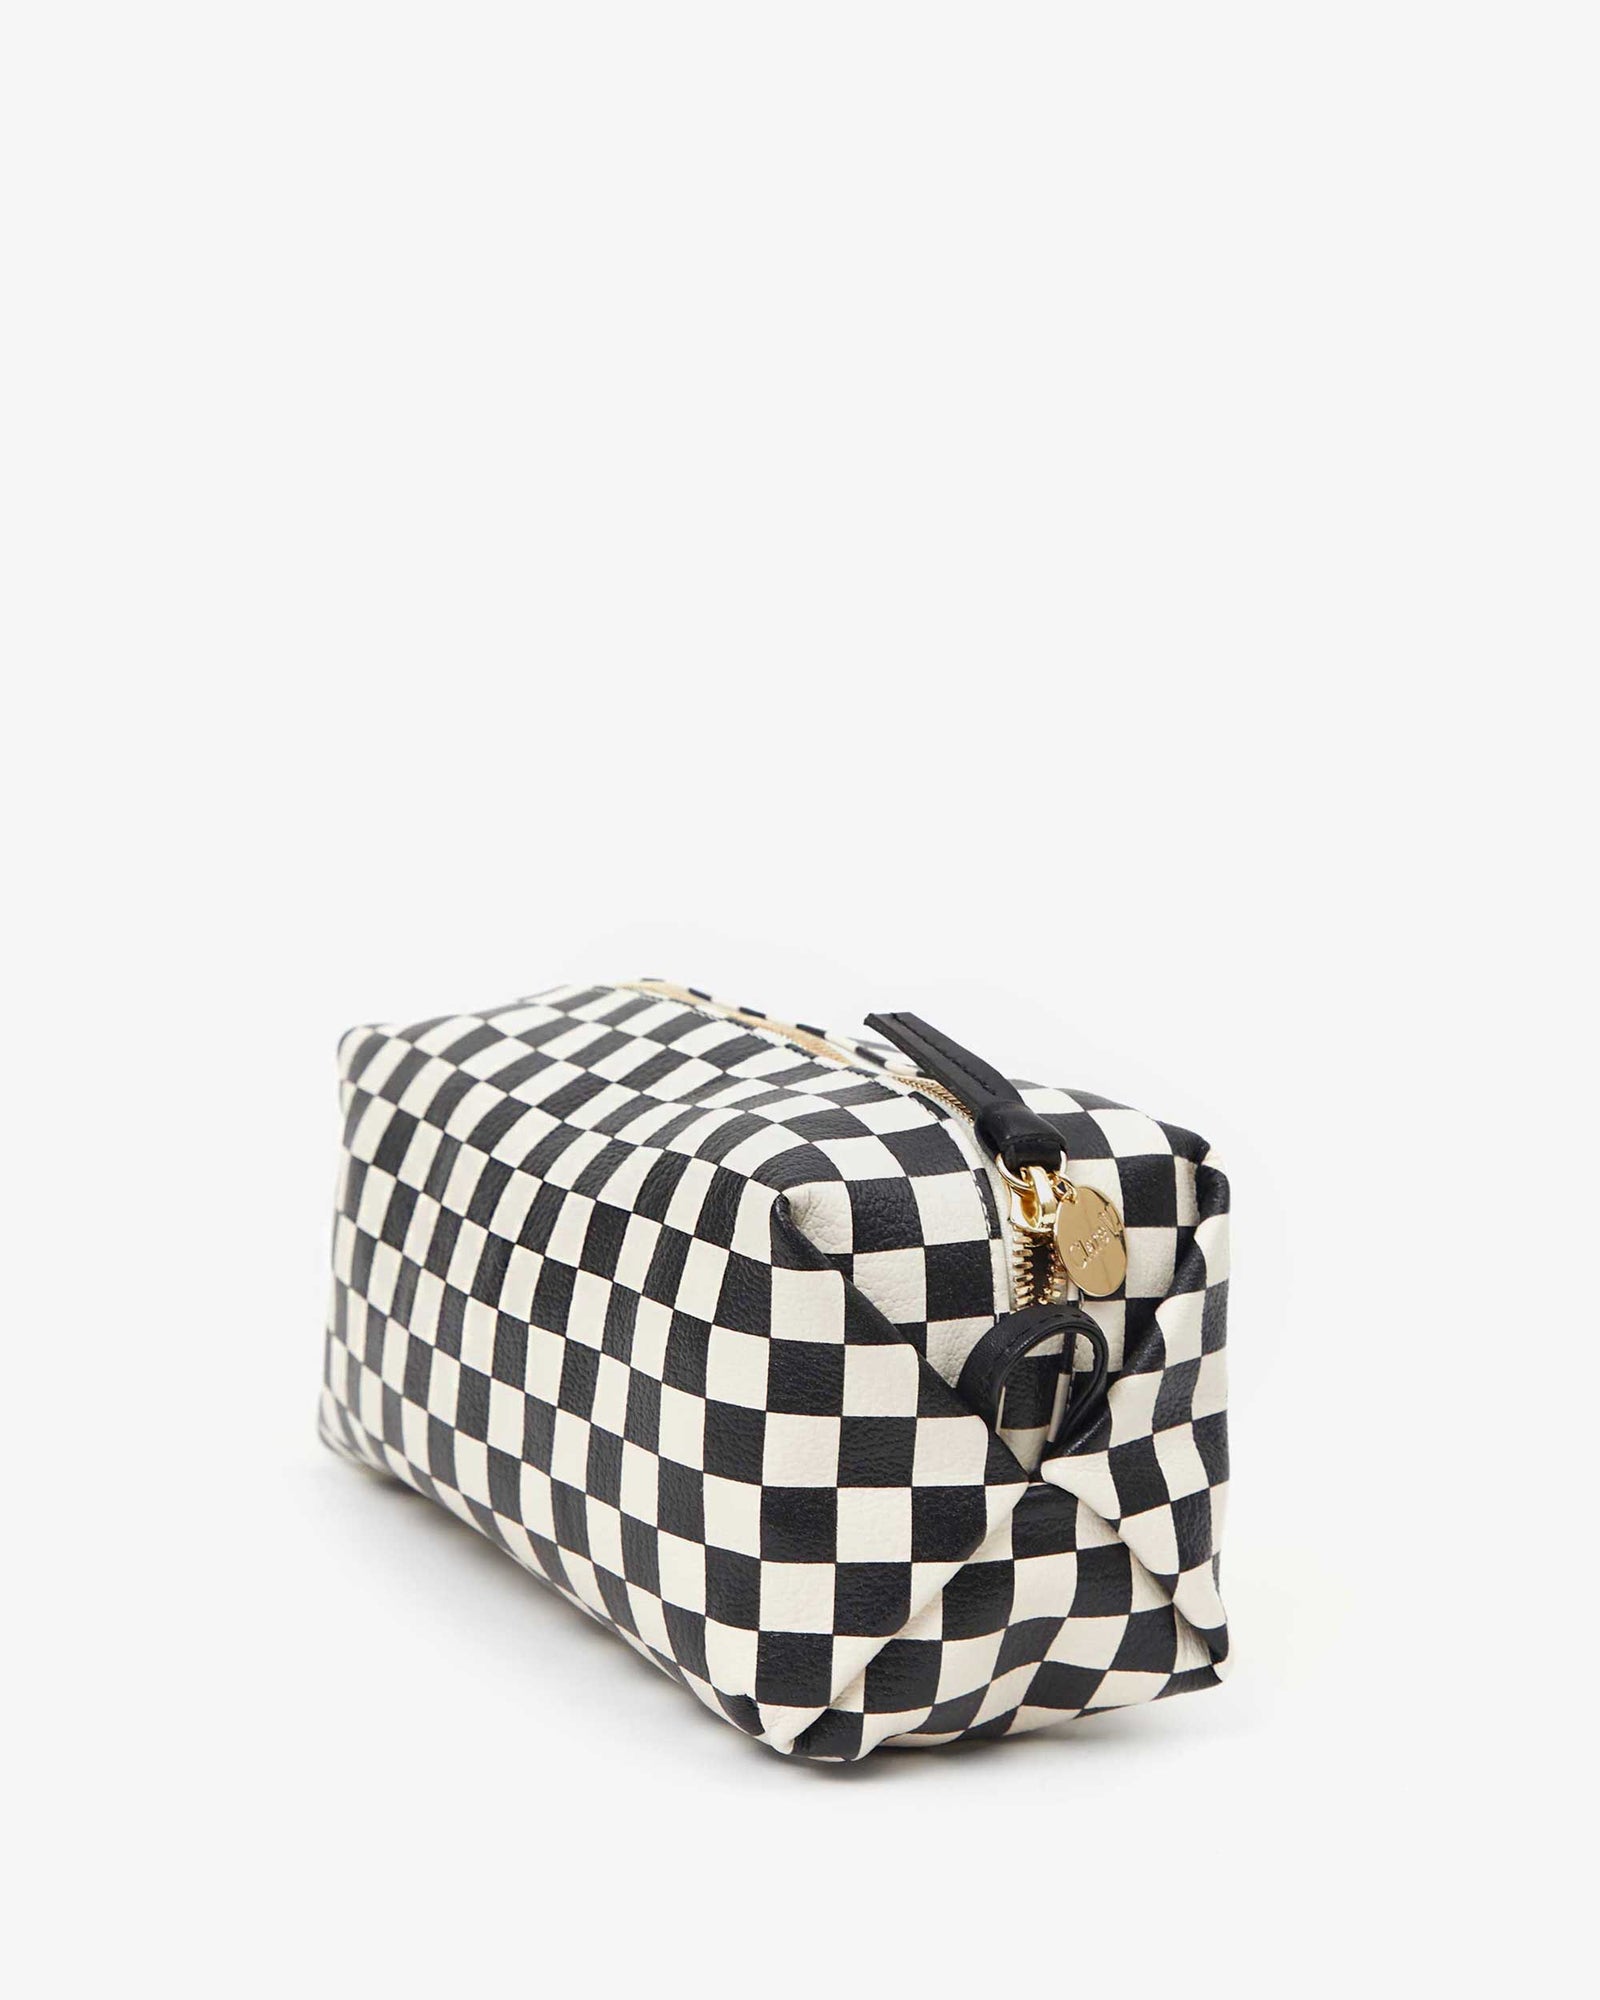 side image of the Black & Cream Checkers Toiletry Case